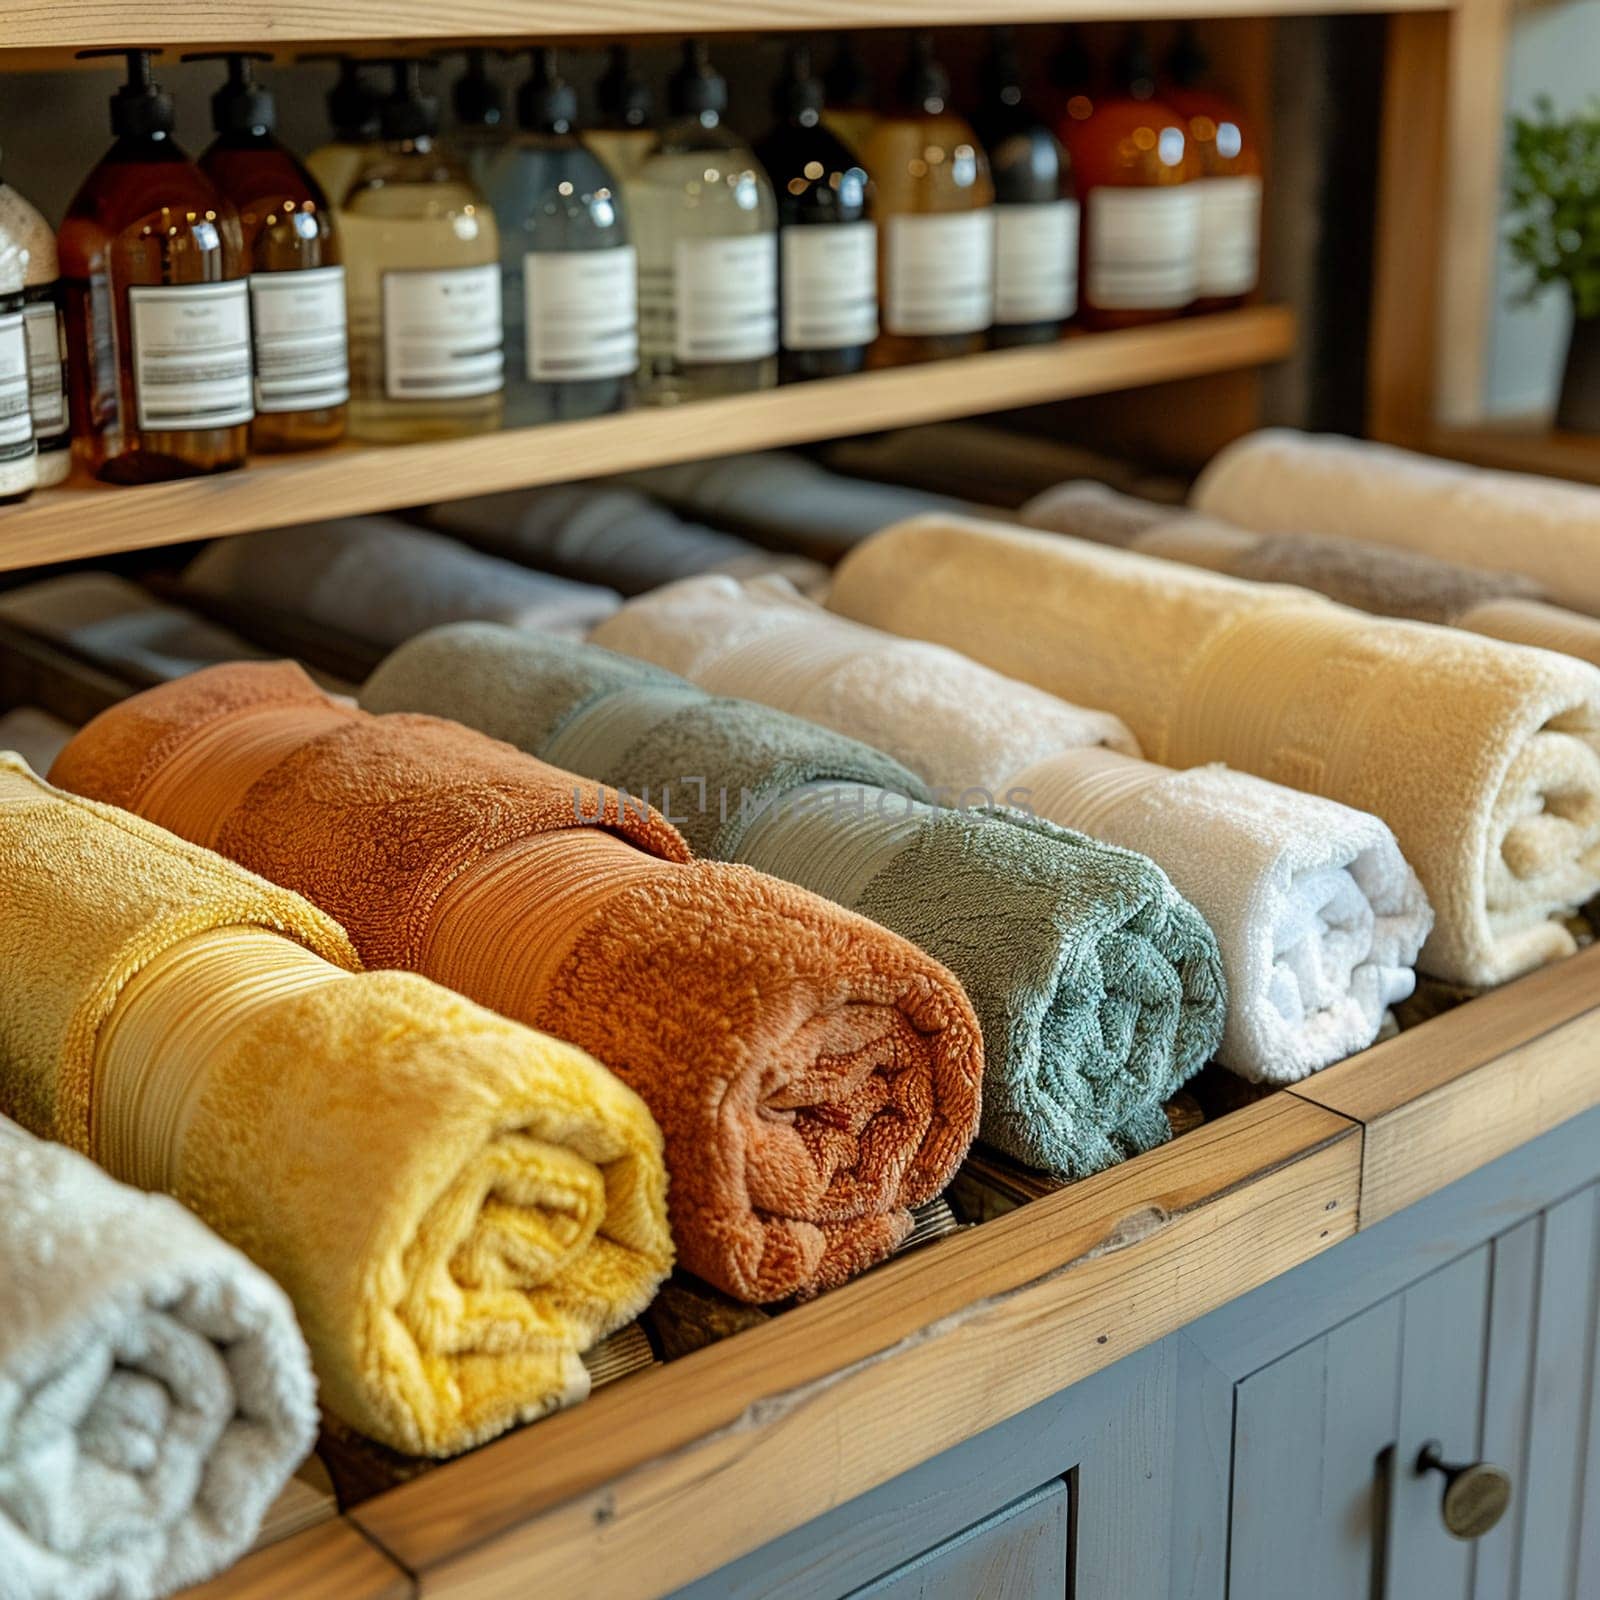 Neatly arranged set of rolled towels in spa, denoting luxury and relaxation.